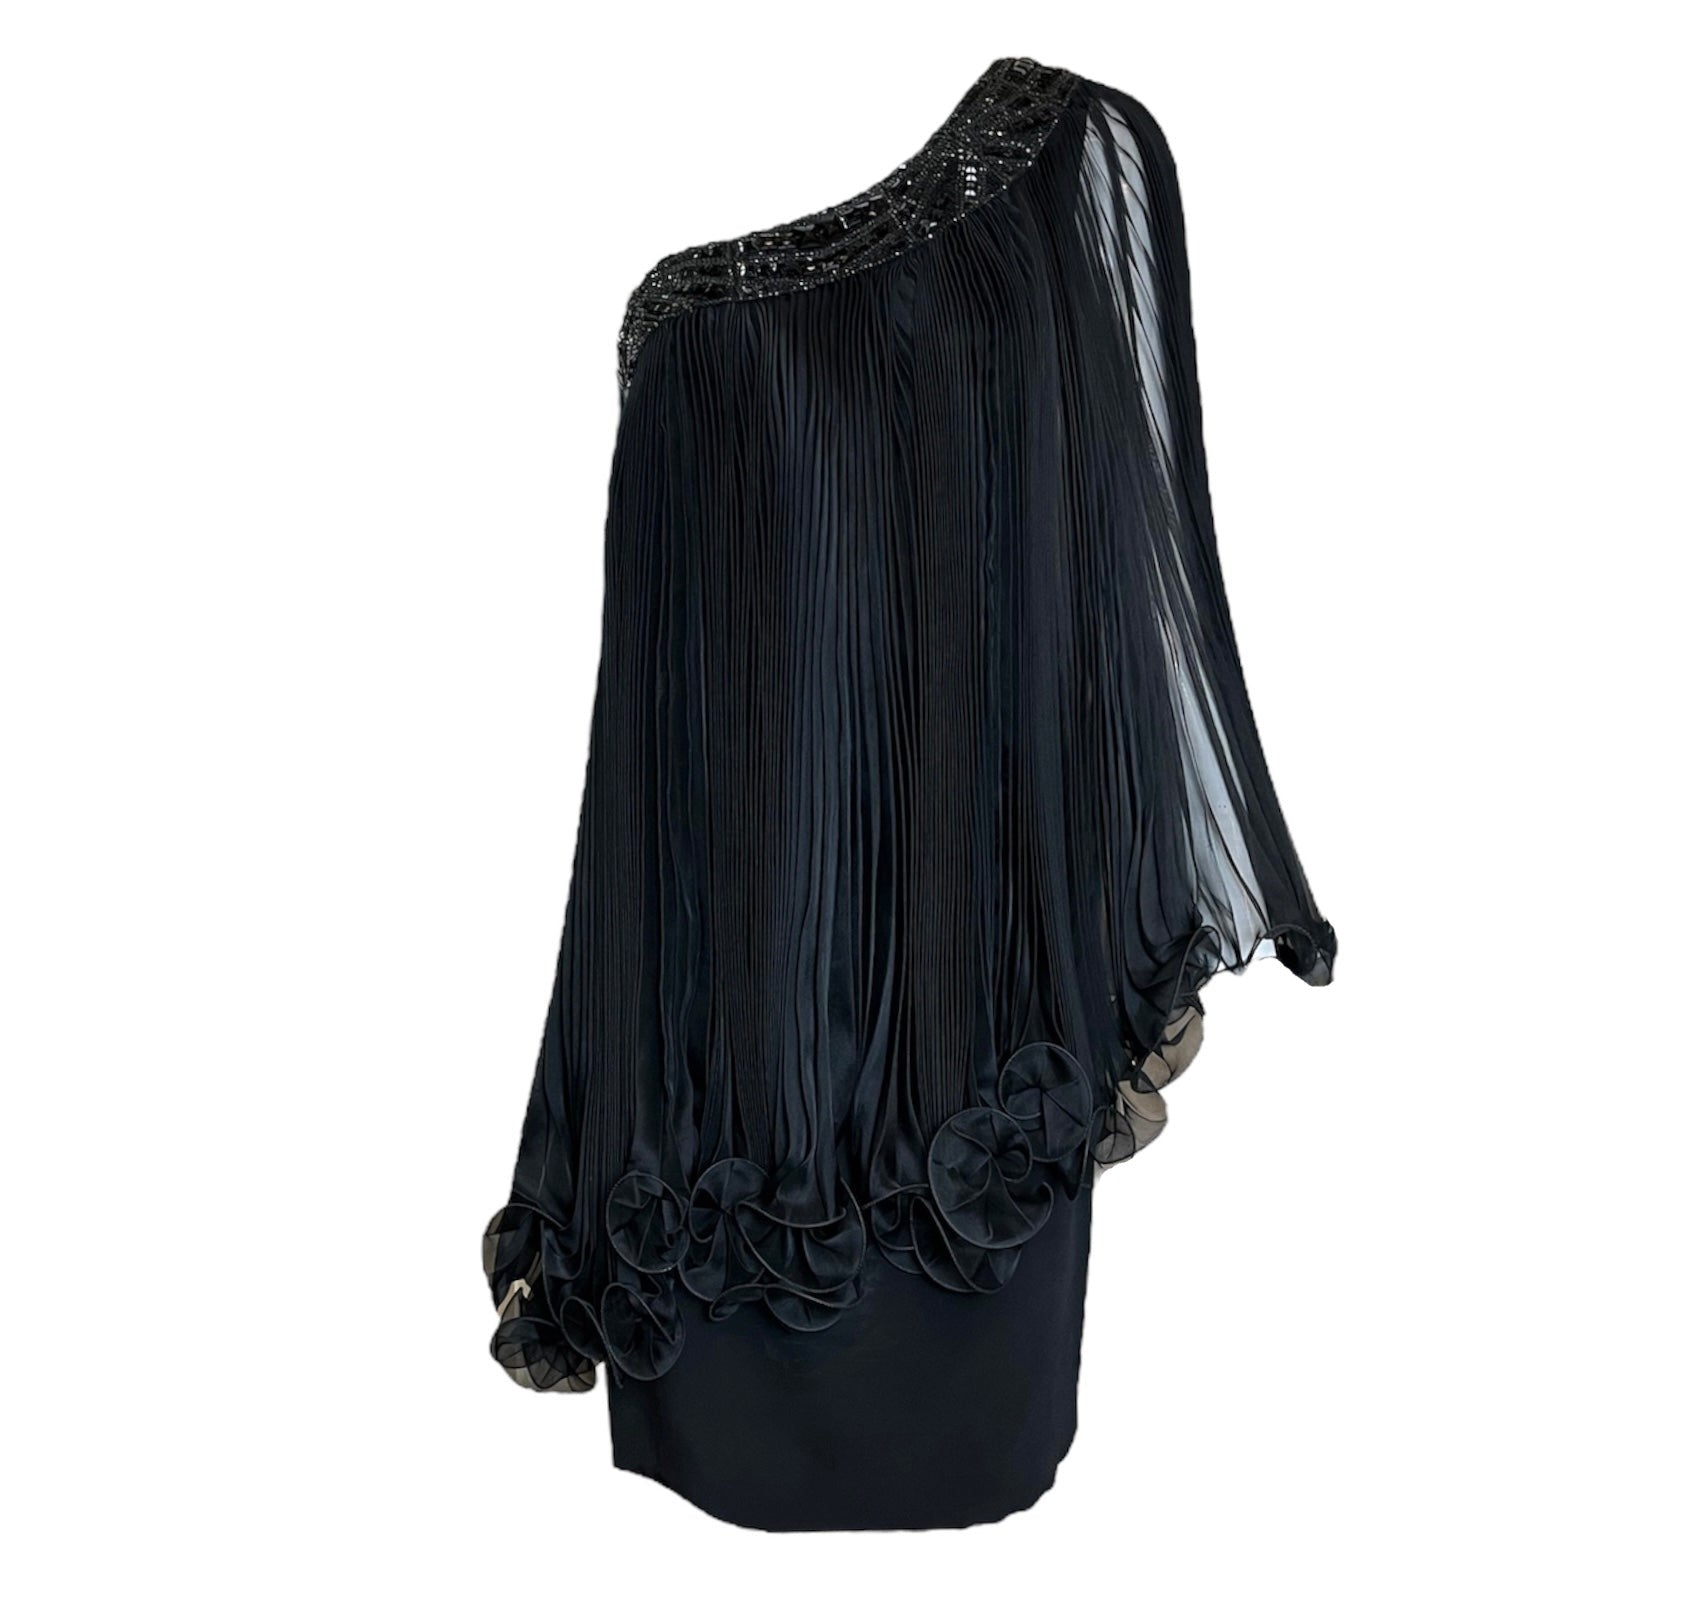 Marchesa One-Shoulder Pleated Cocktail Dress FRONT 1 OF 4 